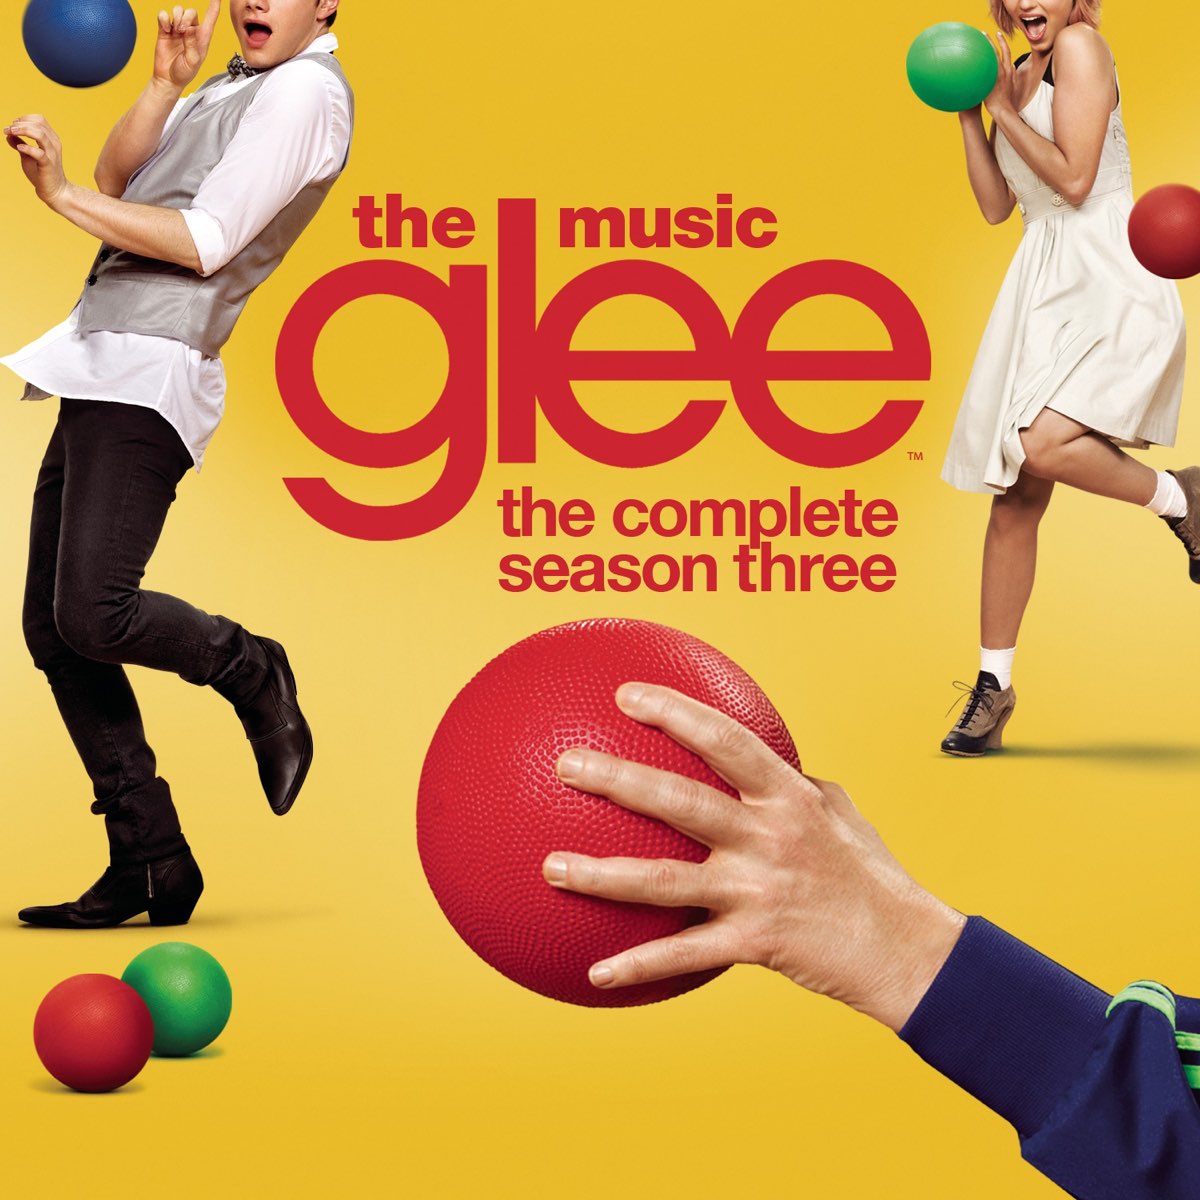 ‎Glee: The Music, The Complete Season Three by Glee Cast on Apple Music